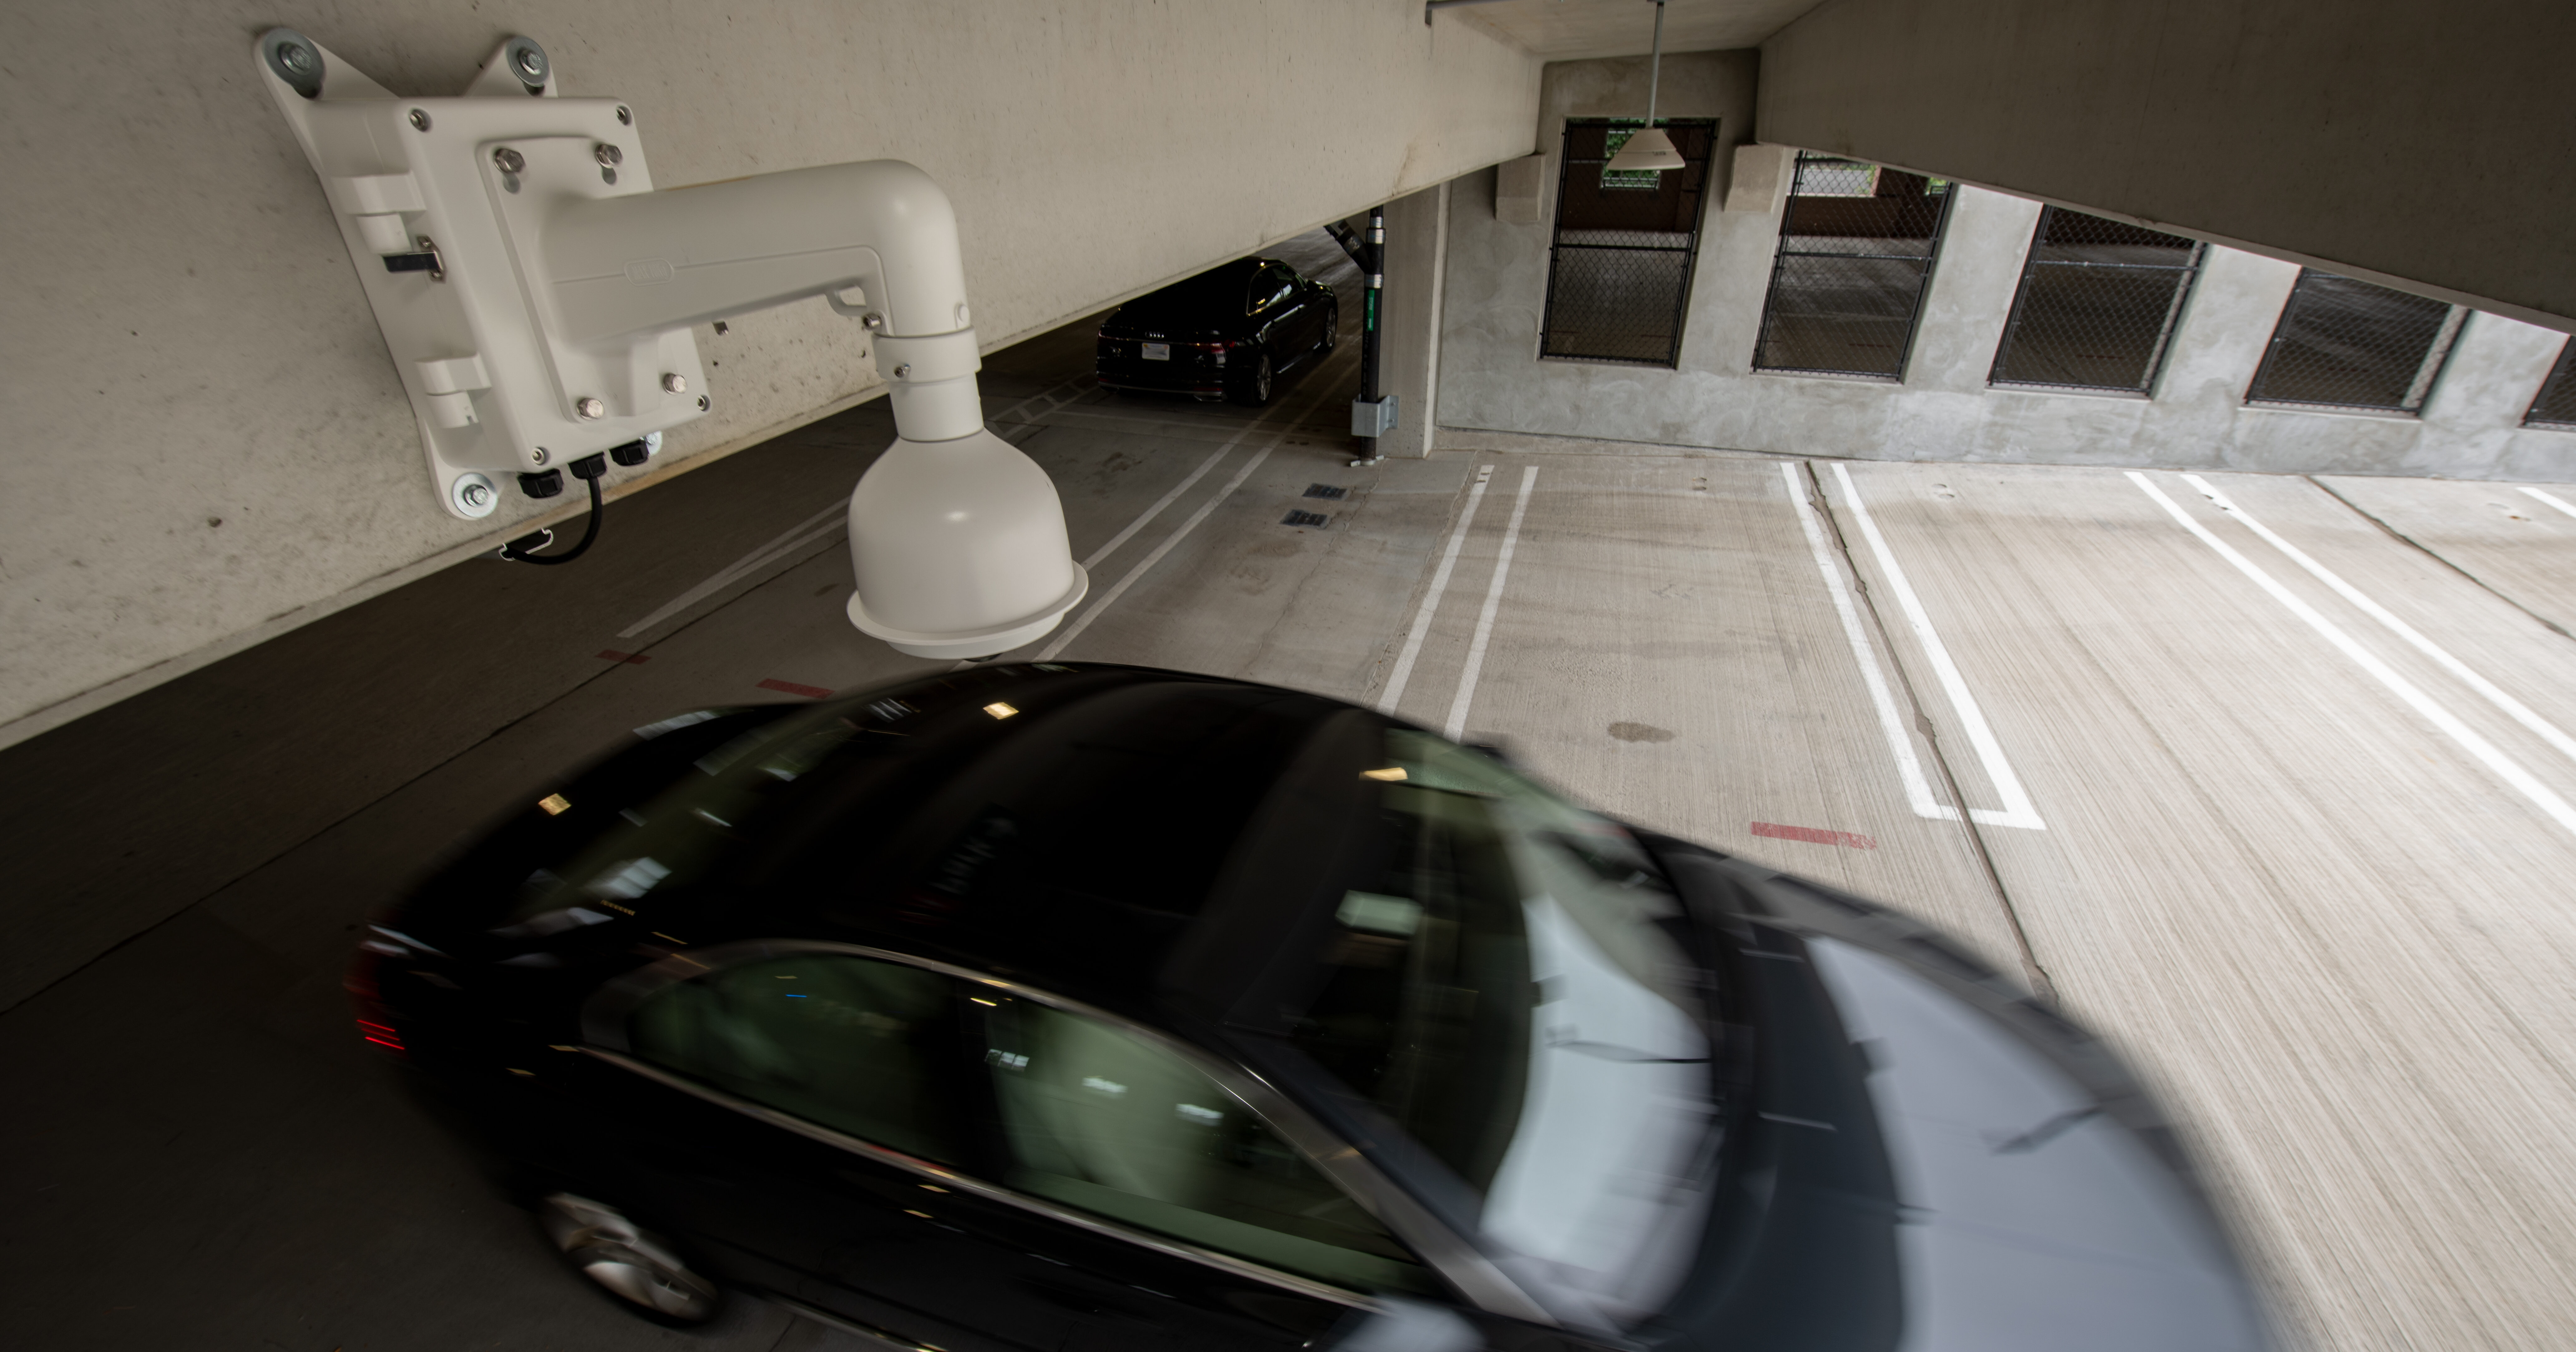 Learn your parking garage counts with a C5 that counts traffic flowing in both directions at the same time